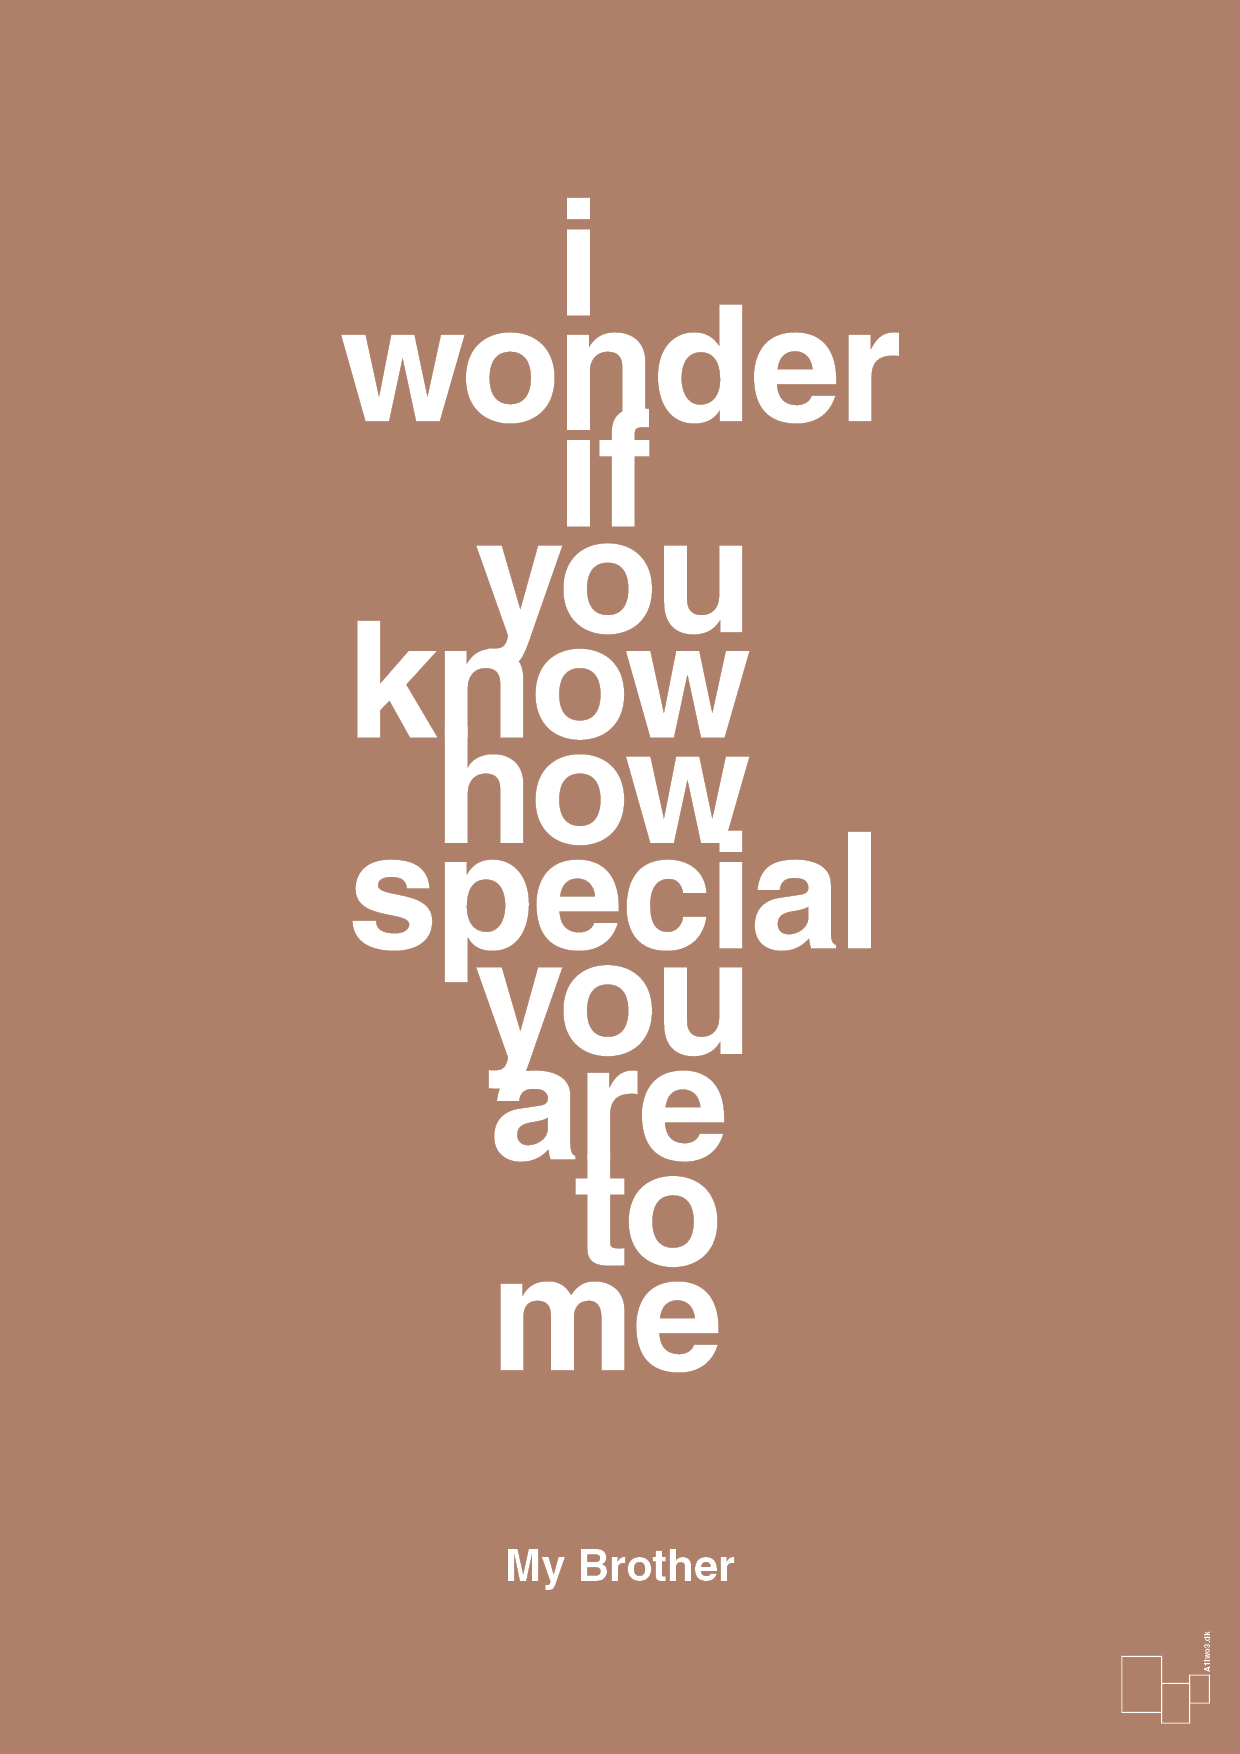 my brother - i wonder if you know how special you are to me - Plakat med Citater i Cider Spice